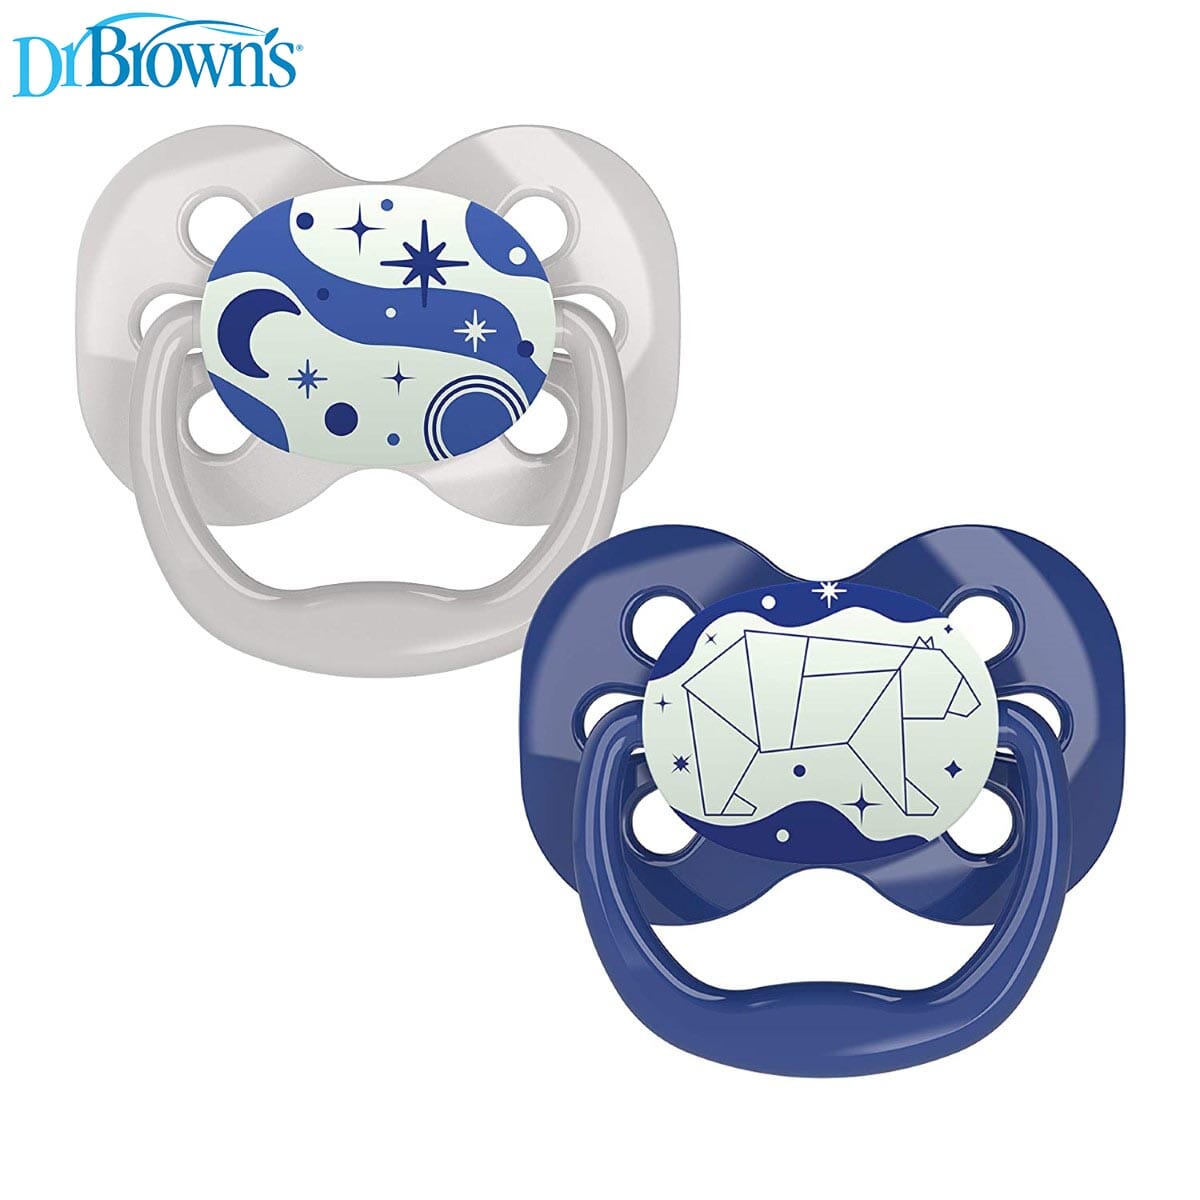 Dr. Browns Advantage Pacifiers, Stage 1, Glow in the Dark, Pack of 2 - Blue - DBPA12004-INTL